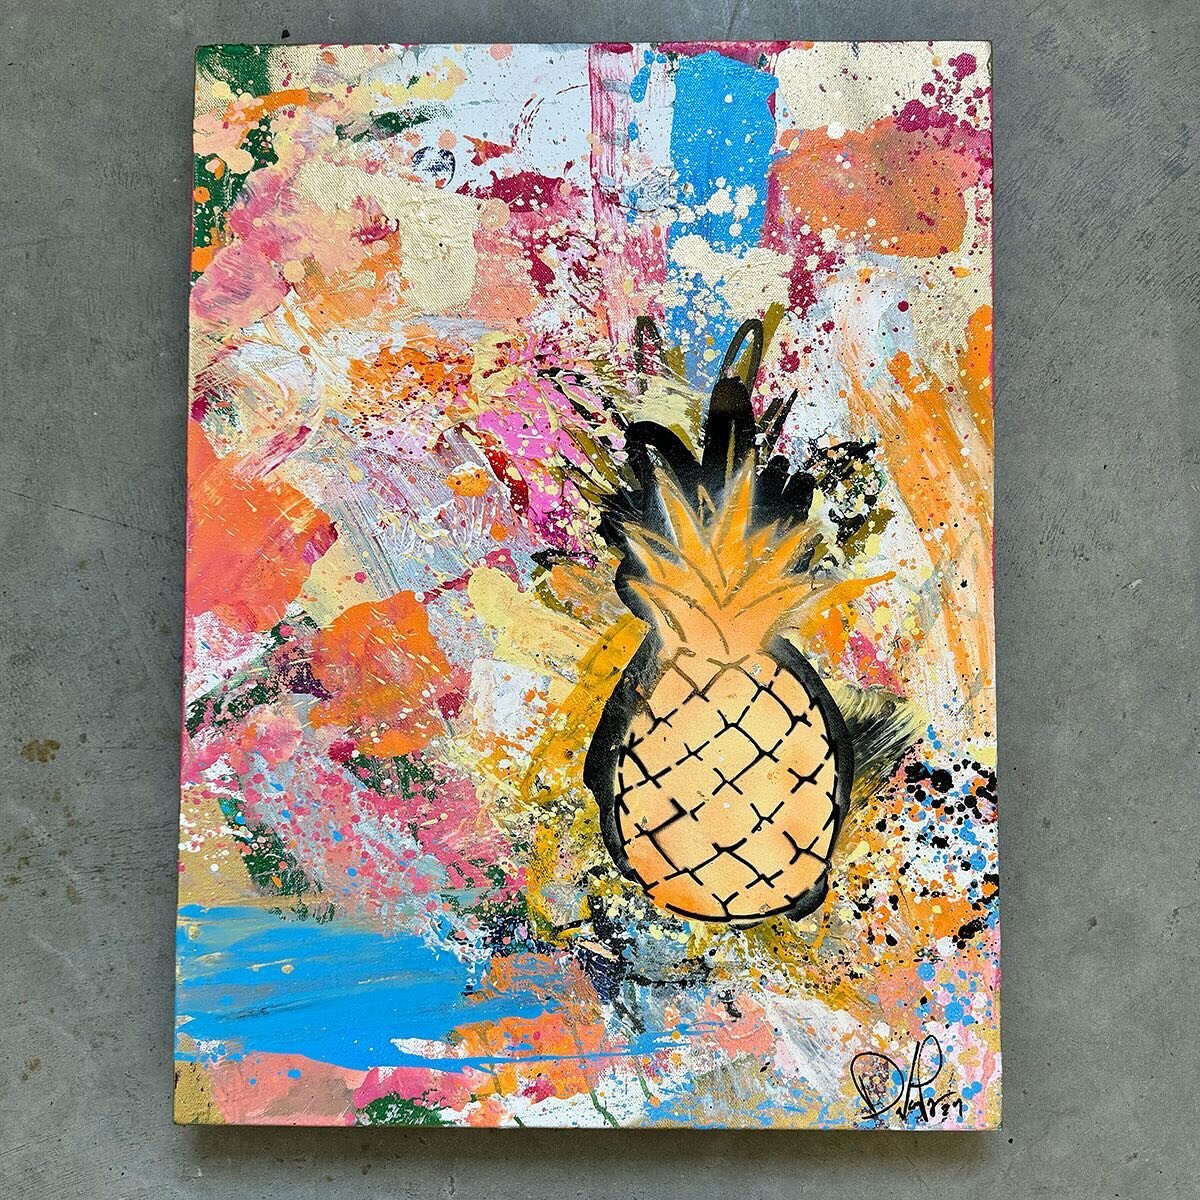 One of my art deliveries this week was a newly painted &ldquo;Pineapple No.30&rdquo; which hangs in the heart Downtown Tampa at the Unlock Tampa Bay Visitors Center.

This canvas piece measures 24in x 18in x 1.5in and if you are interested&hellip;you